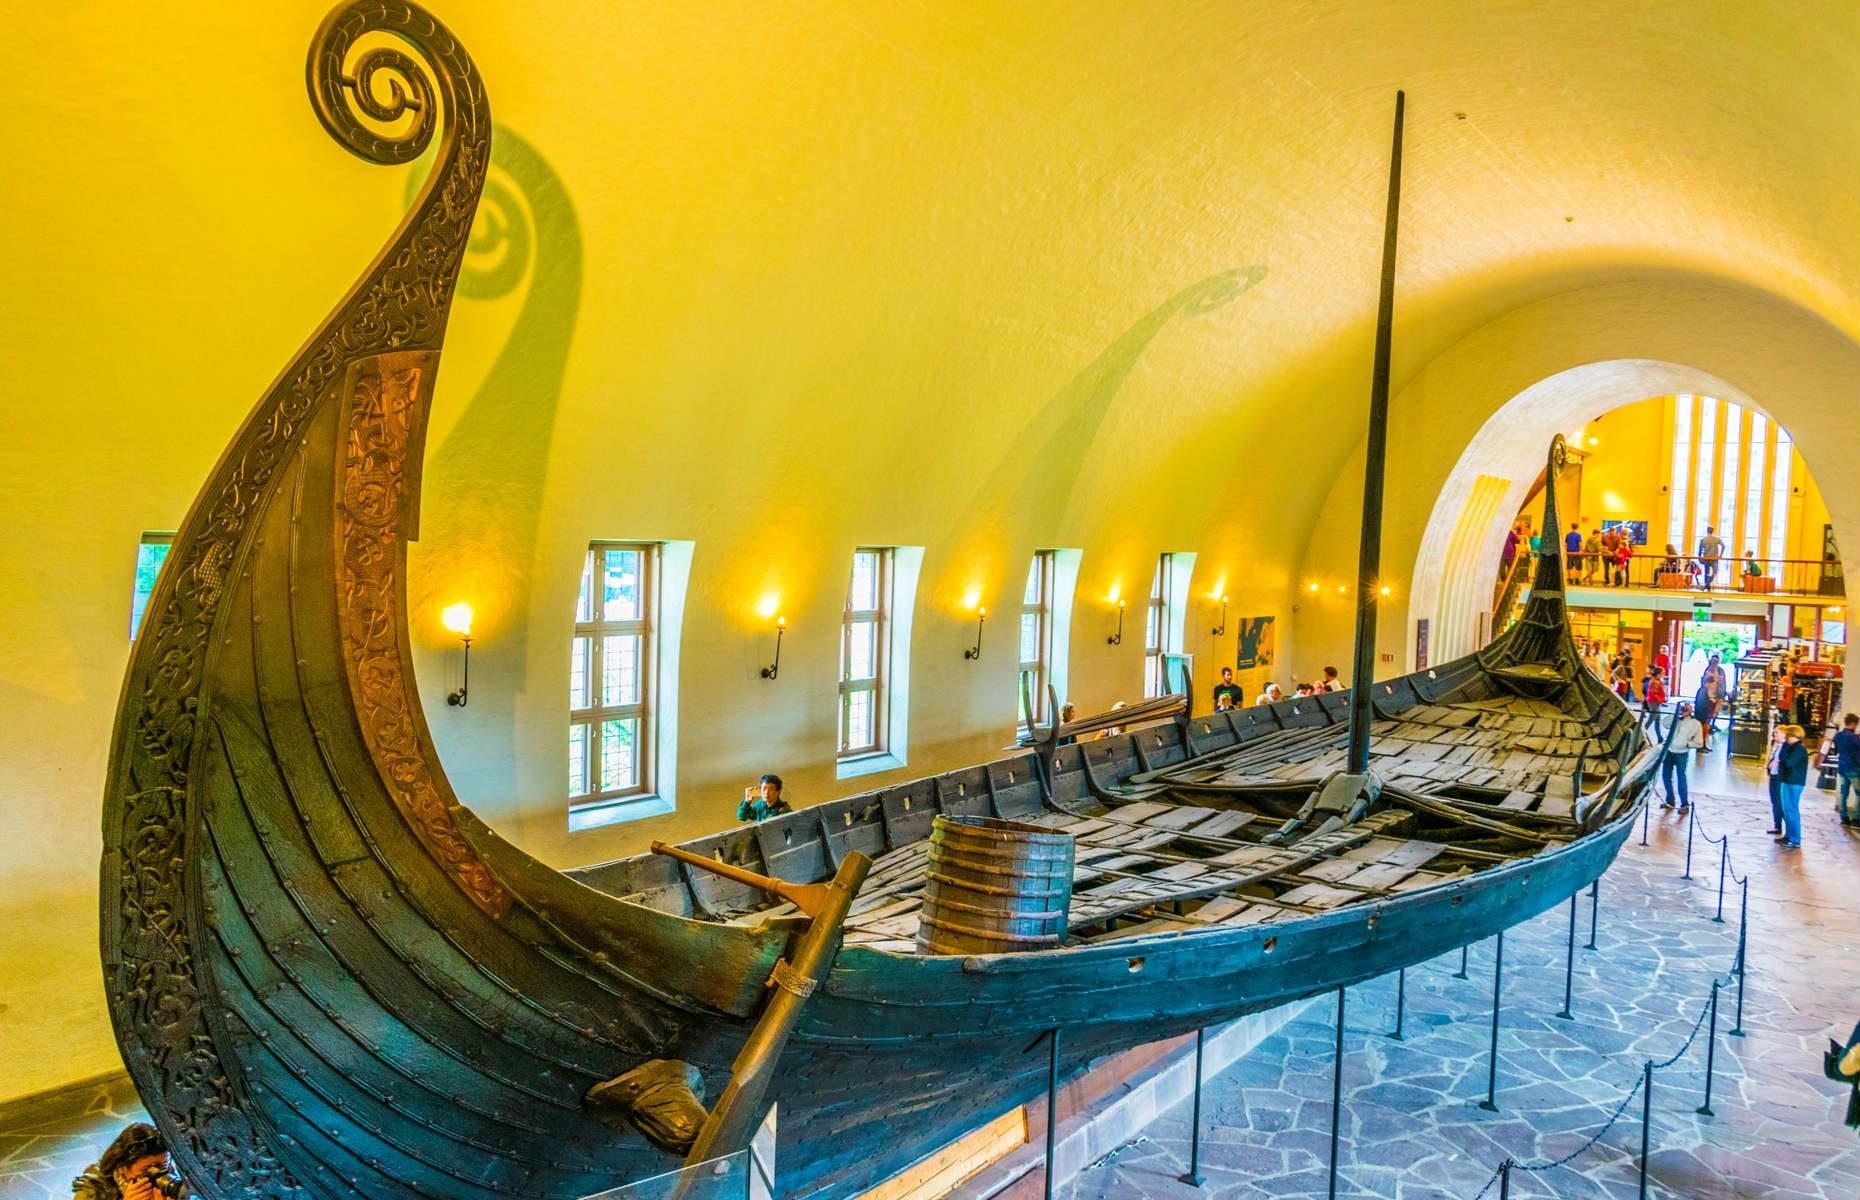 <p>Oslo’s <a href="https://www.khm.uio.no/english/">Viking Ship Museum</a> is home to three fabulously fascinating ships, the Oseberg, Gokstad and the Tune, which help to bring the Vikings to life. Beautifully crafted and well preserved, all three were seagoing vessels before they were brought onto land to be used as burial mounds. When they were discovered, each was found with grave gifts, from everyday objects and religious artifacts. </p>